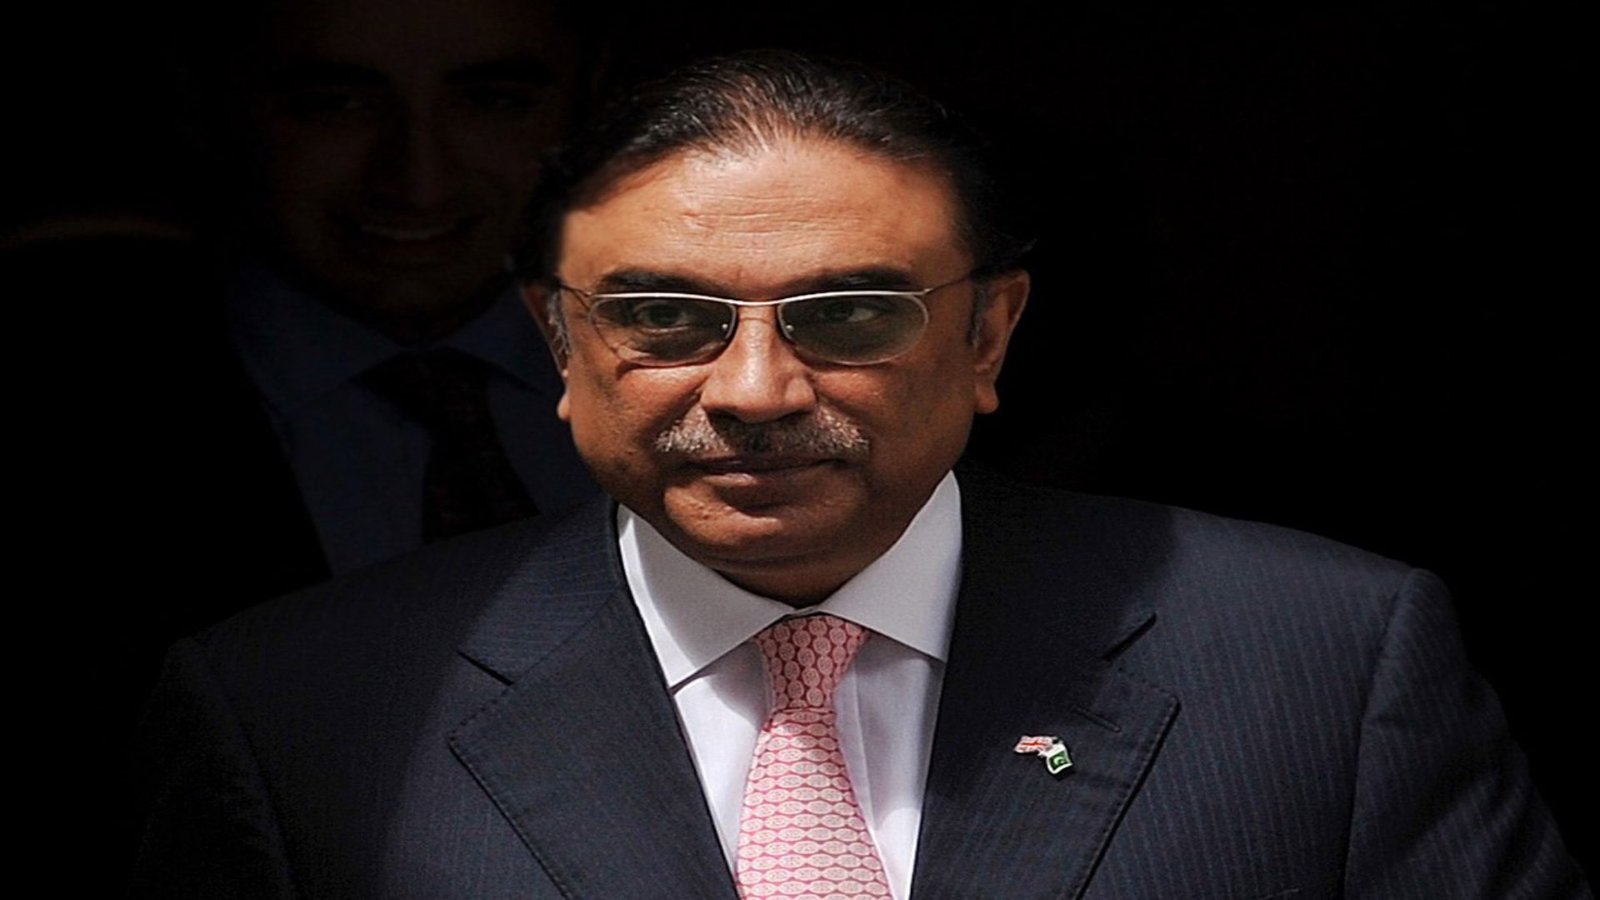 President Zardari wants to resolve issues in AJK through dialogue